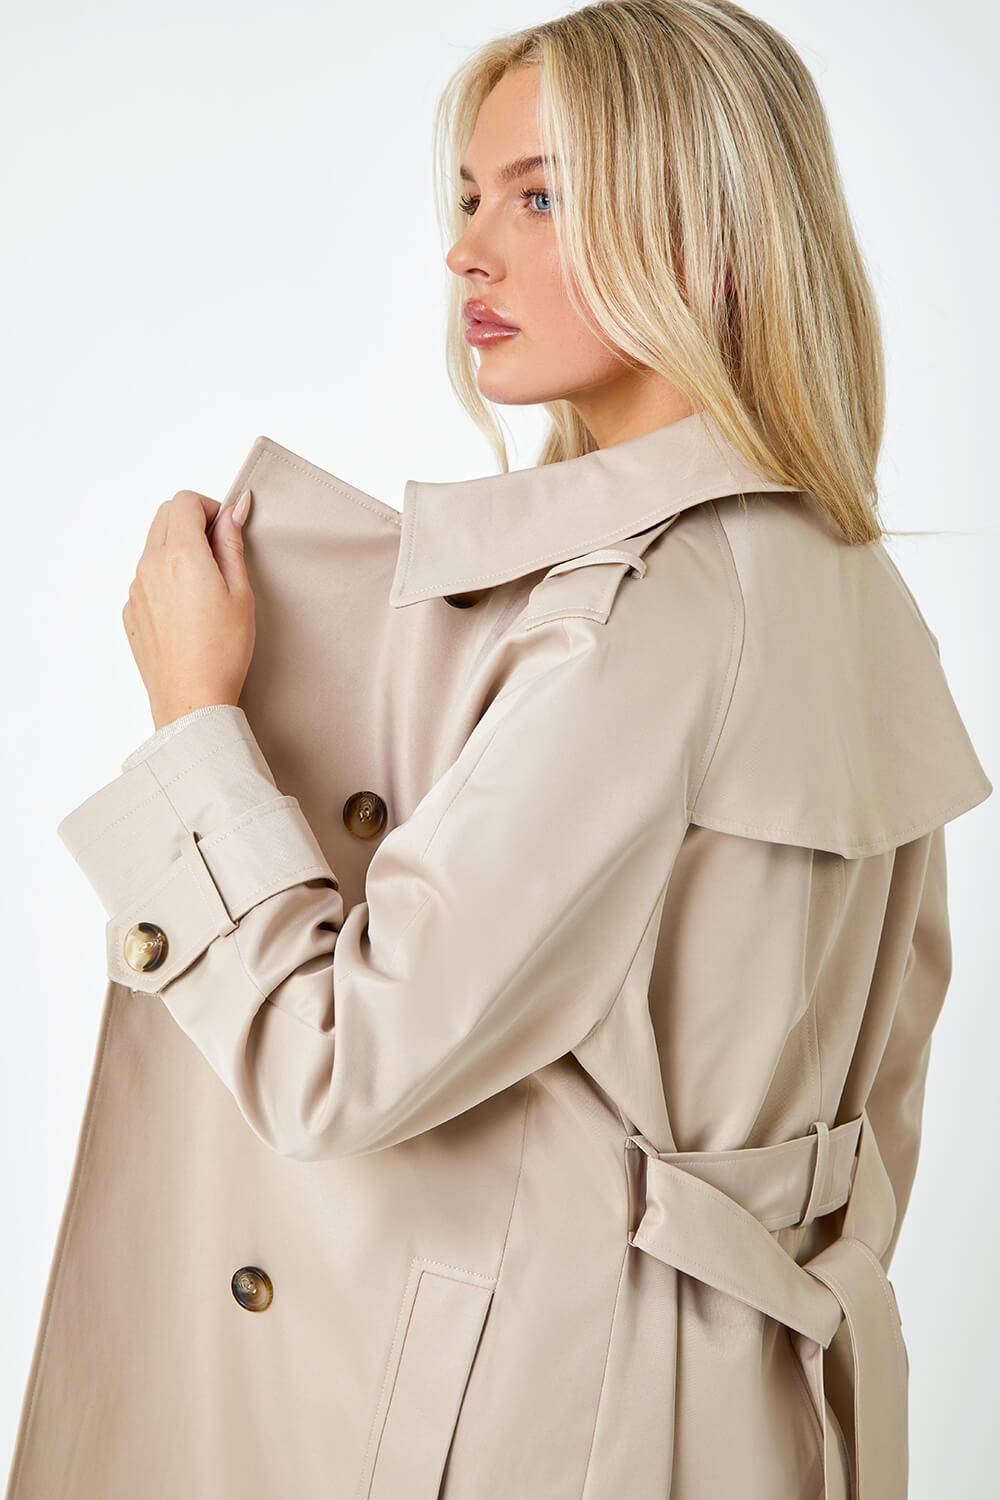 Stone Petite Double Breasted Trench Coat, Image 5 of 6